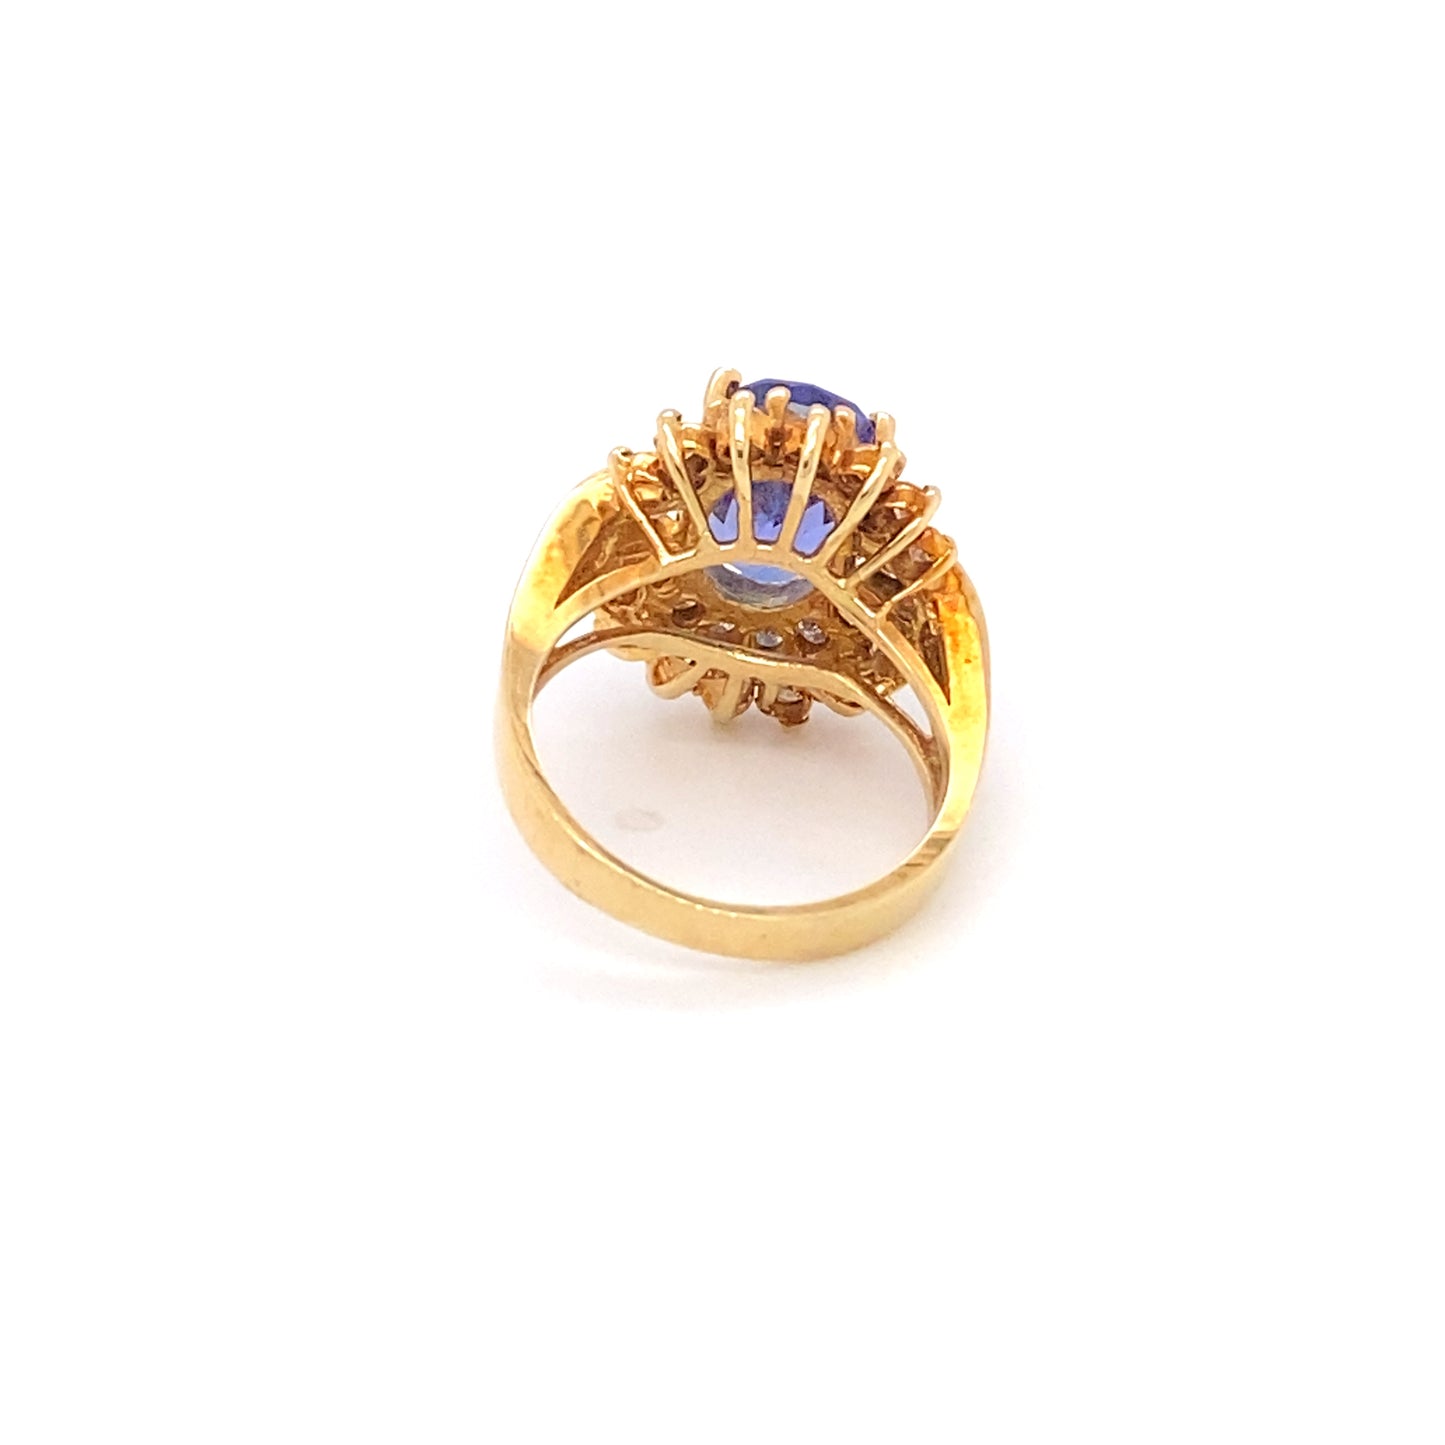 2.0 Carat Oval Sapphire and 0.50 Carat Diamond Ring in 14K Gold